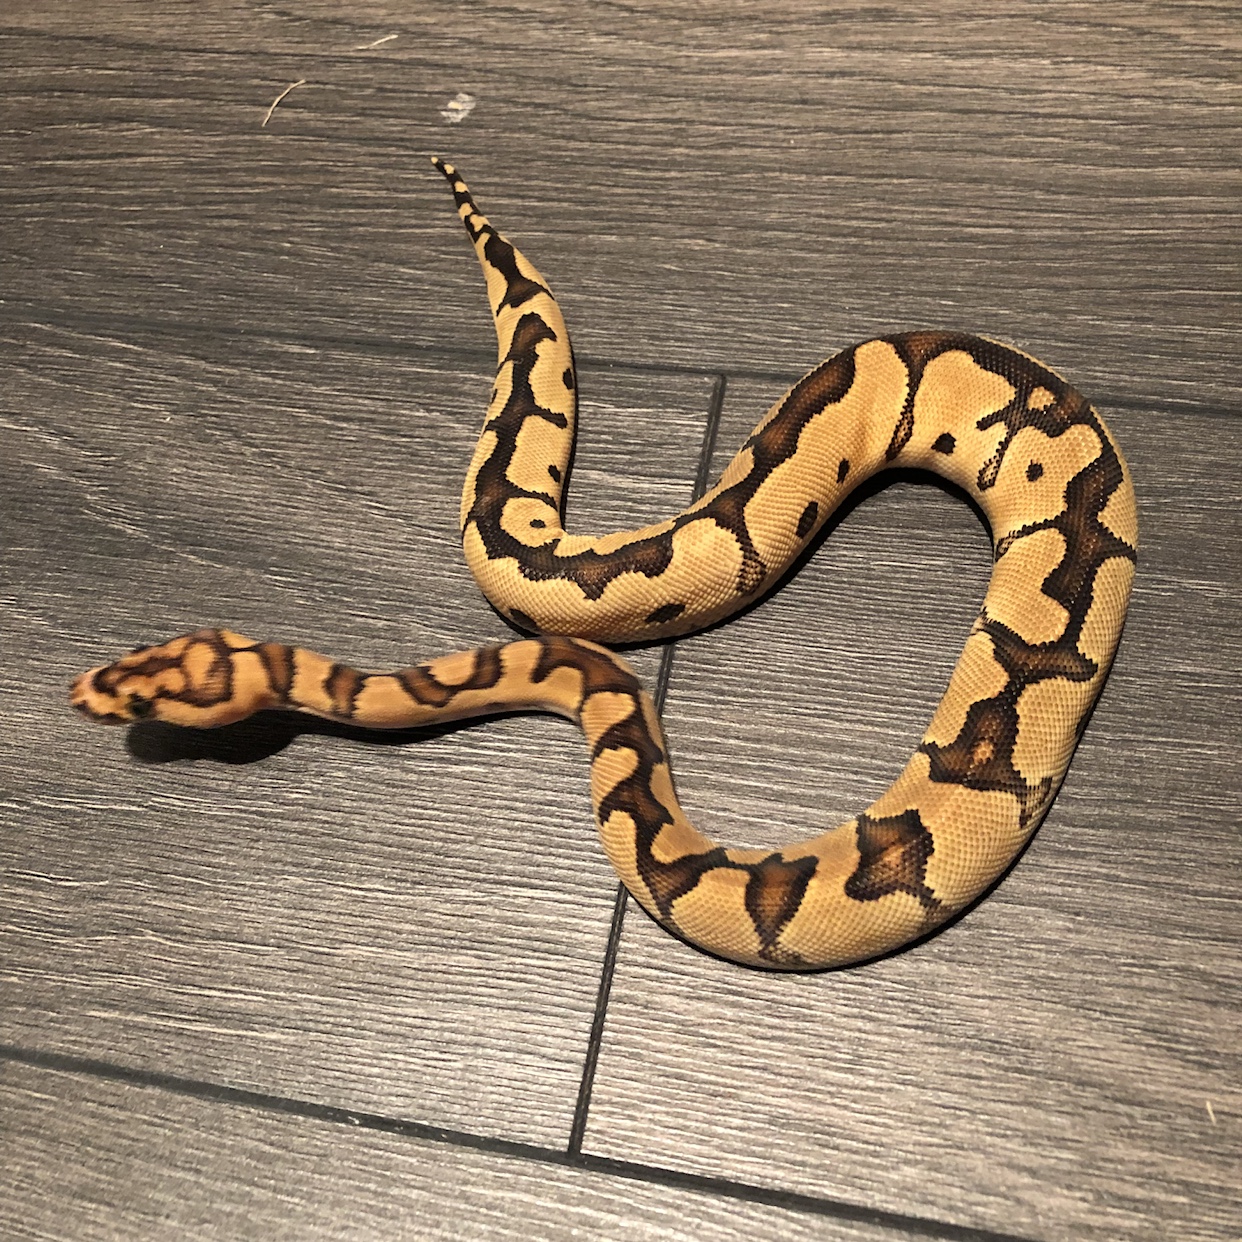 Re: Pastel Clown Ball Python or not? 